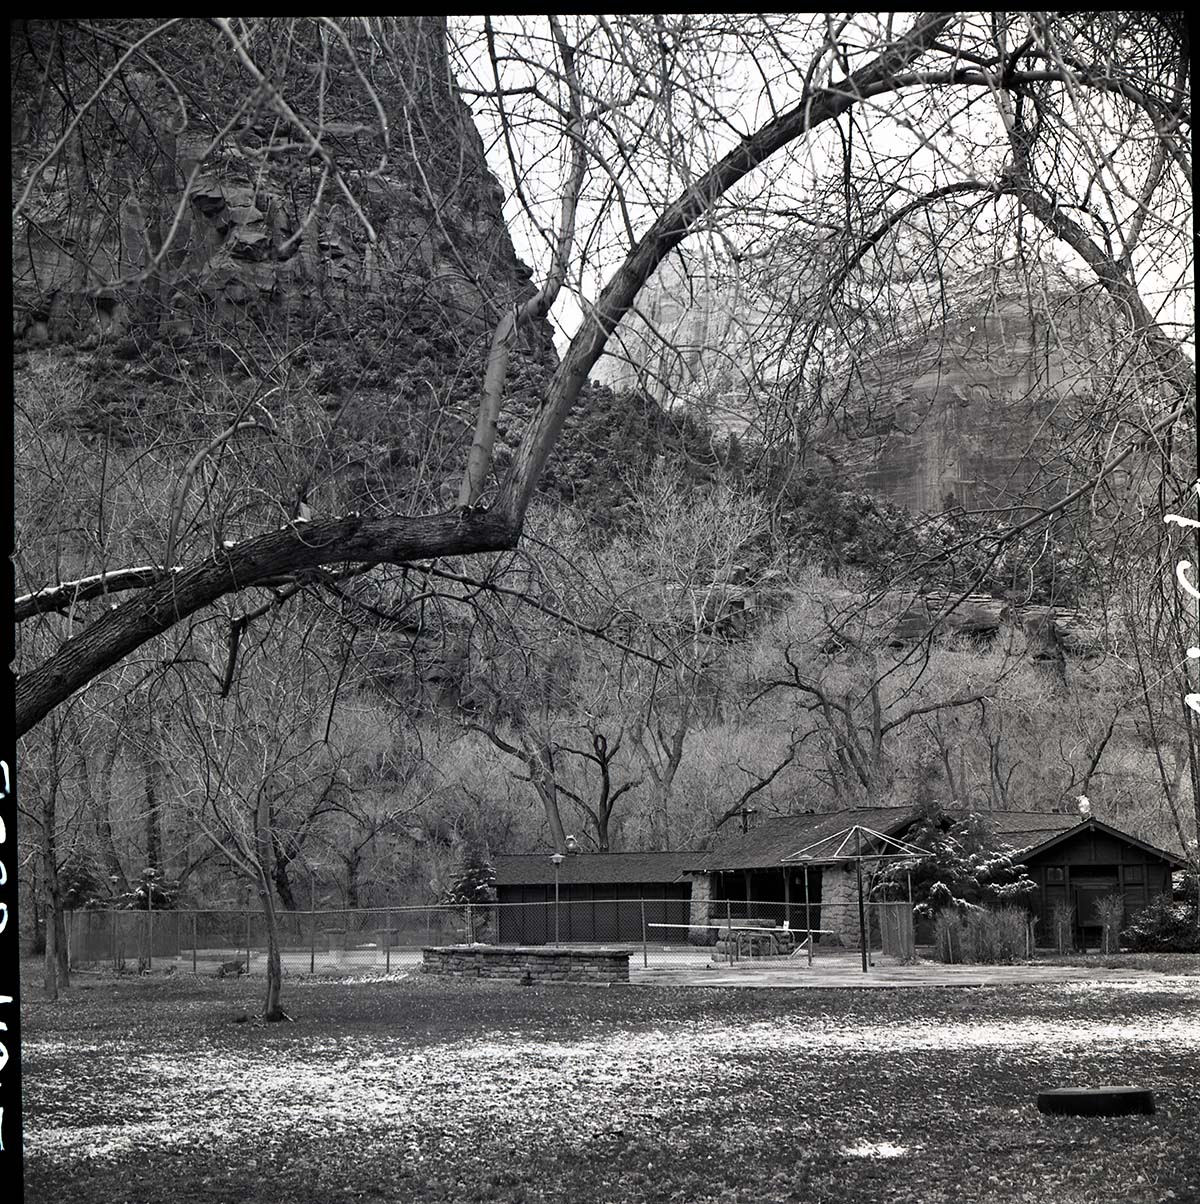 Zion Lodge pool, bath house, cabana frame, and patio. Taken in spring 1975 for Environmental Impact Statement (EIS).